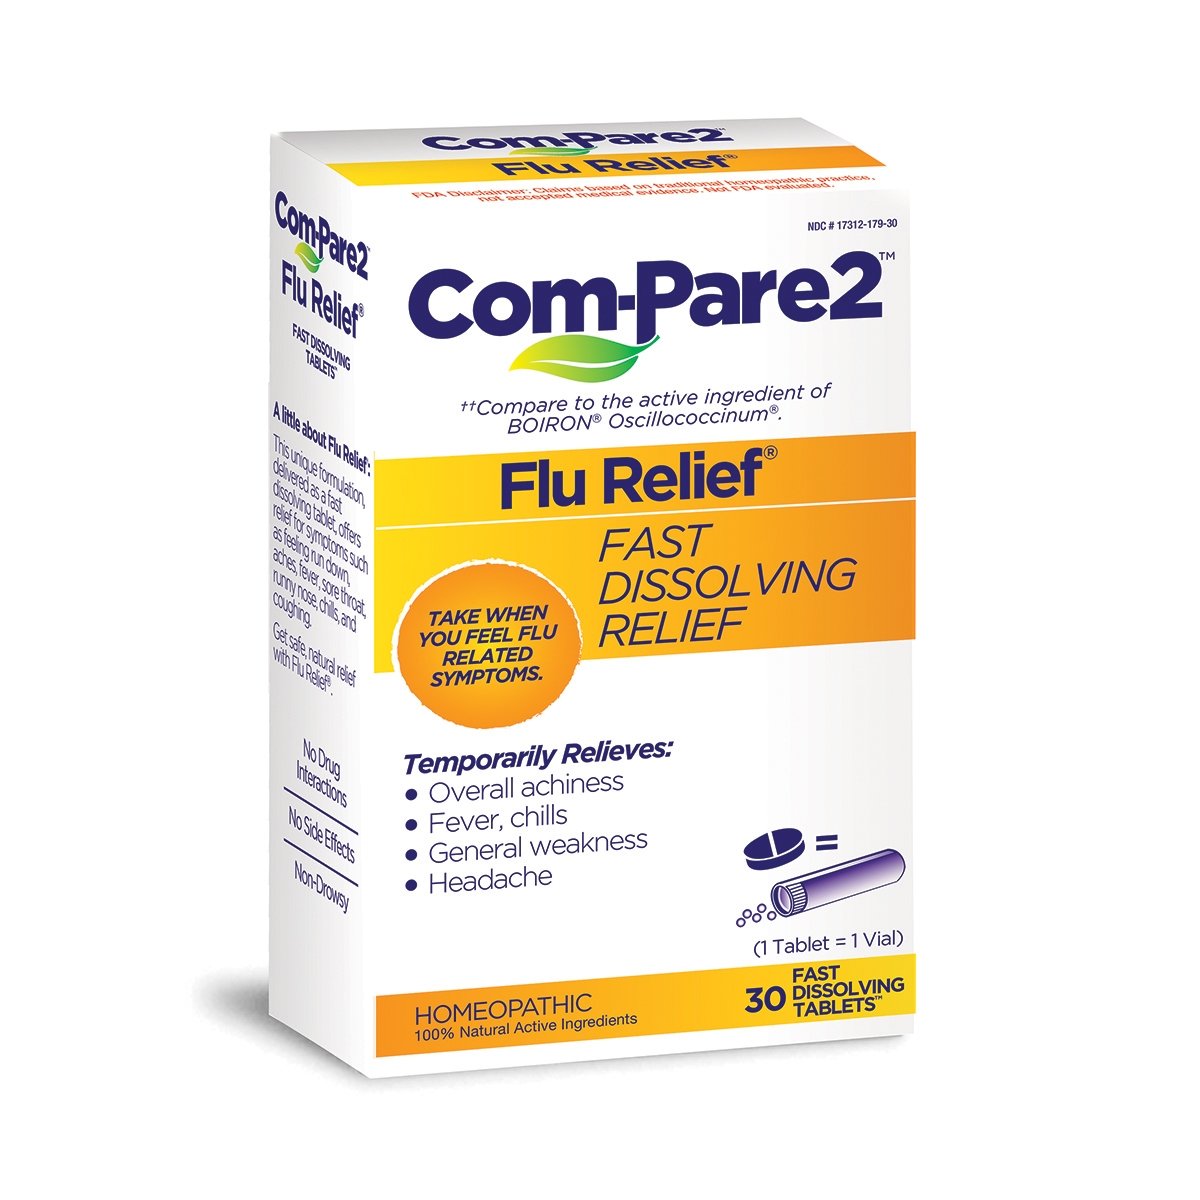 Flu and cold relief